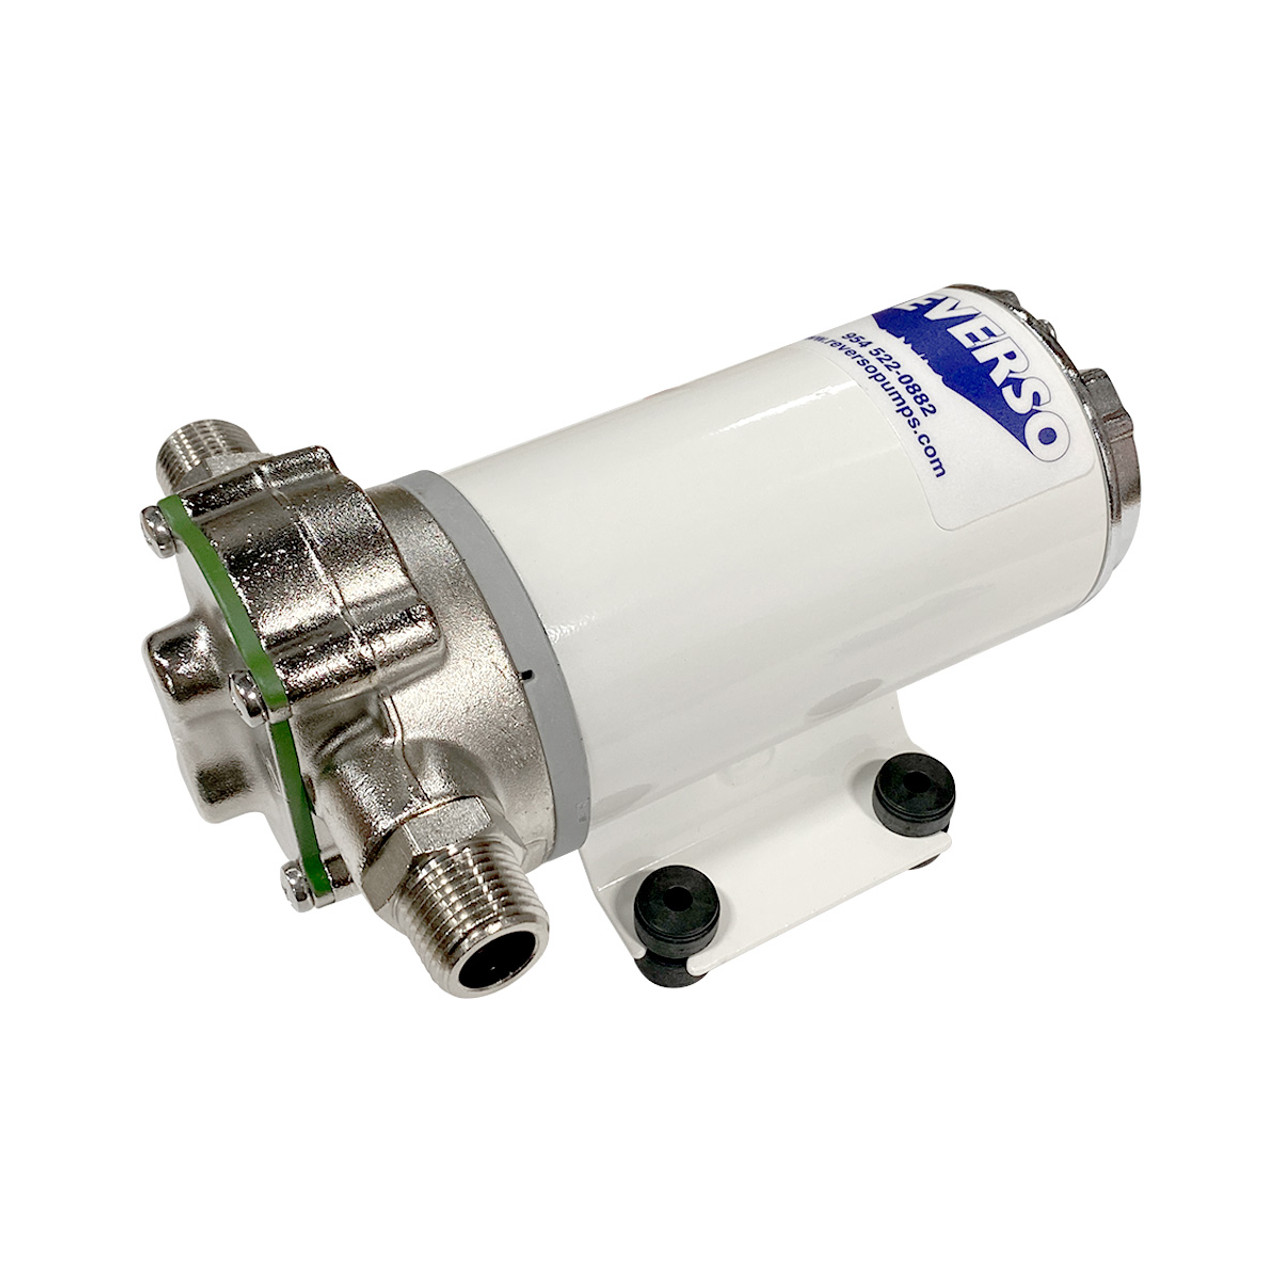 Products - Transfer Pumps - Page 1 - Reverso Pumps LLC